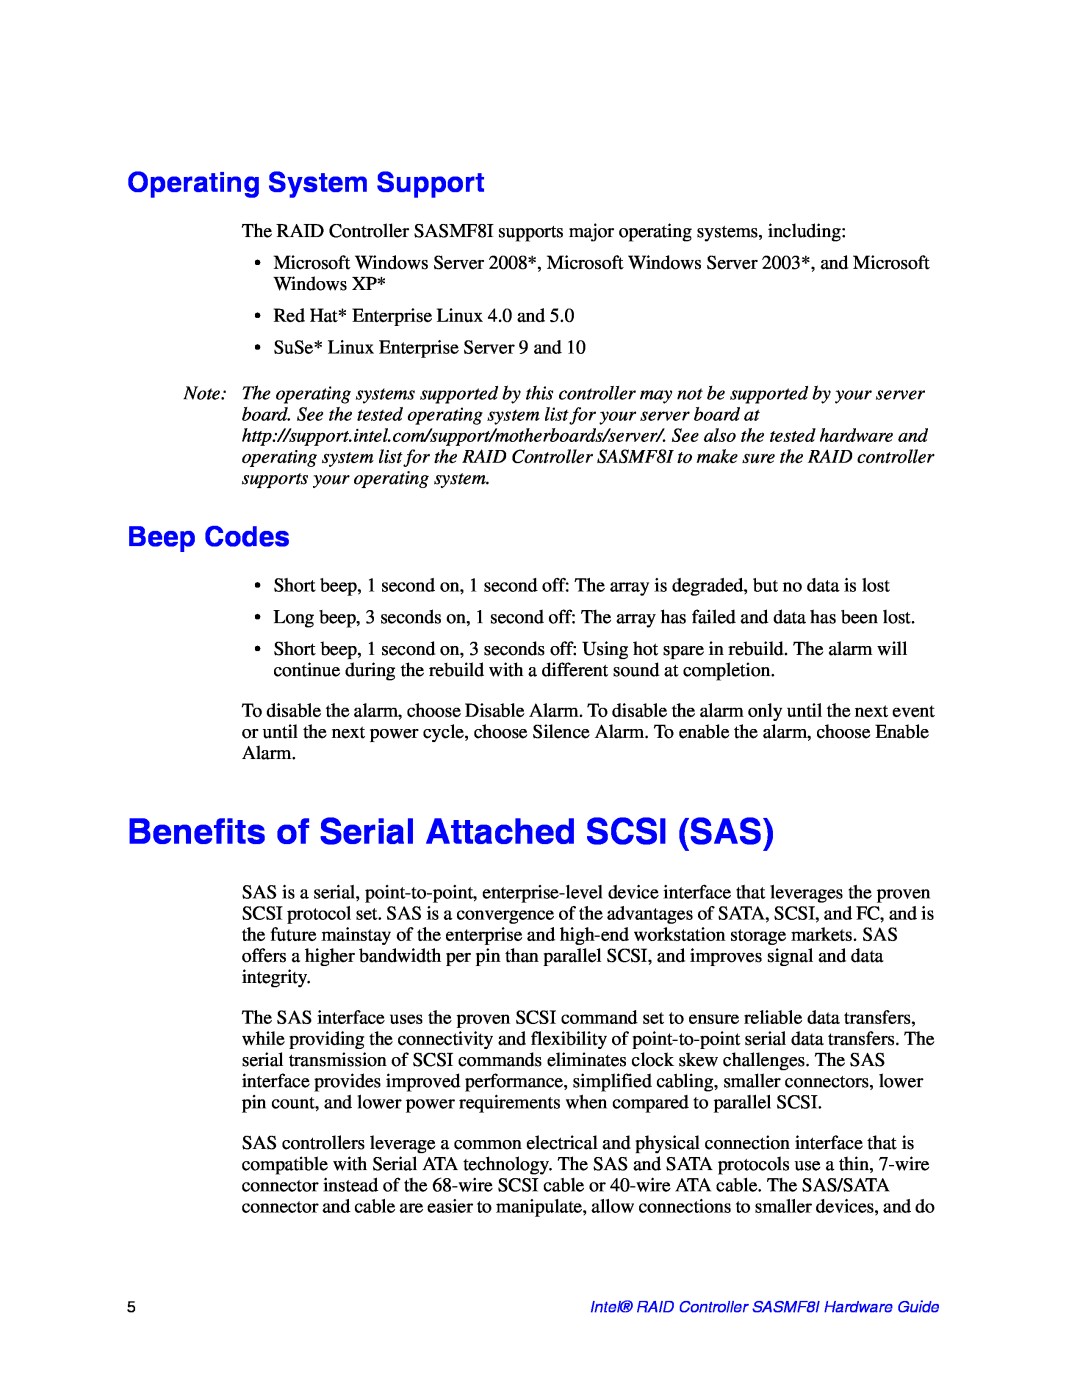 Intel SASMF8I manual Benefits of Serial Attached SCSI SAS, Operating System Support, Beep Codes 